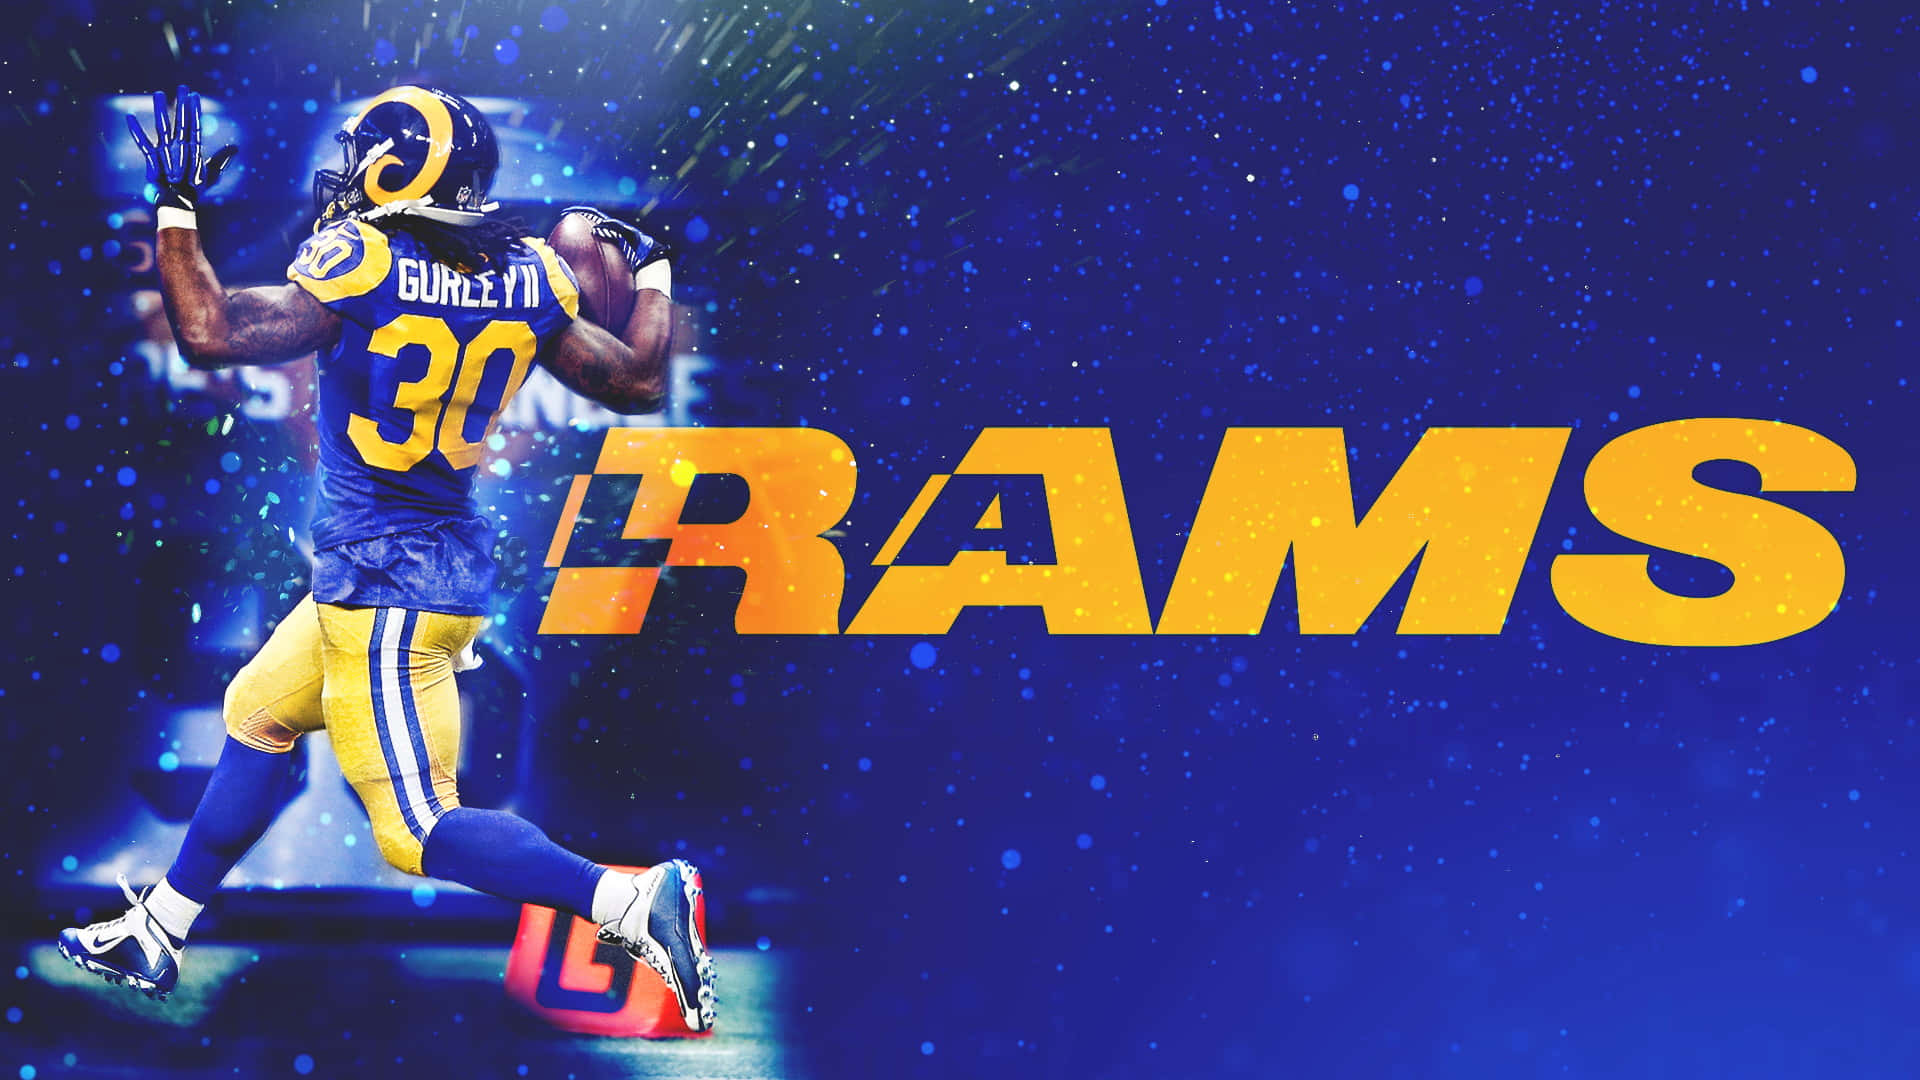 The Rams Logo With A Player Running In The Background Wallpaper